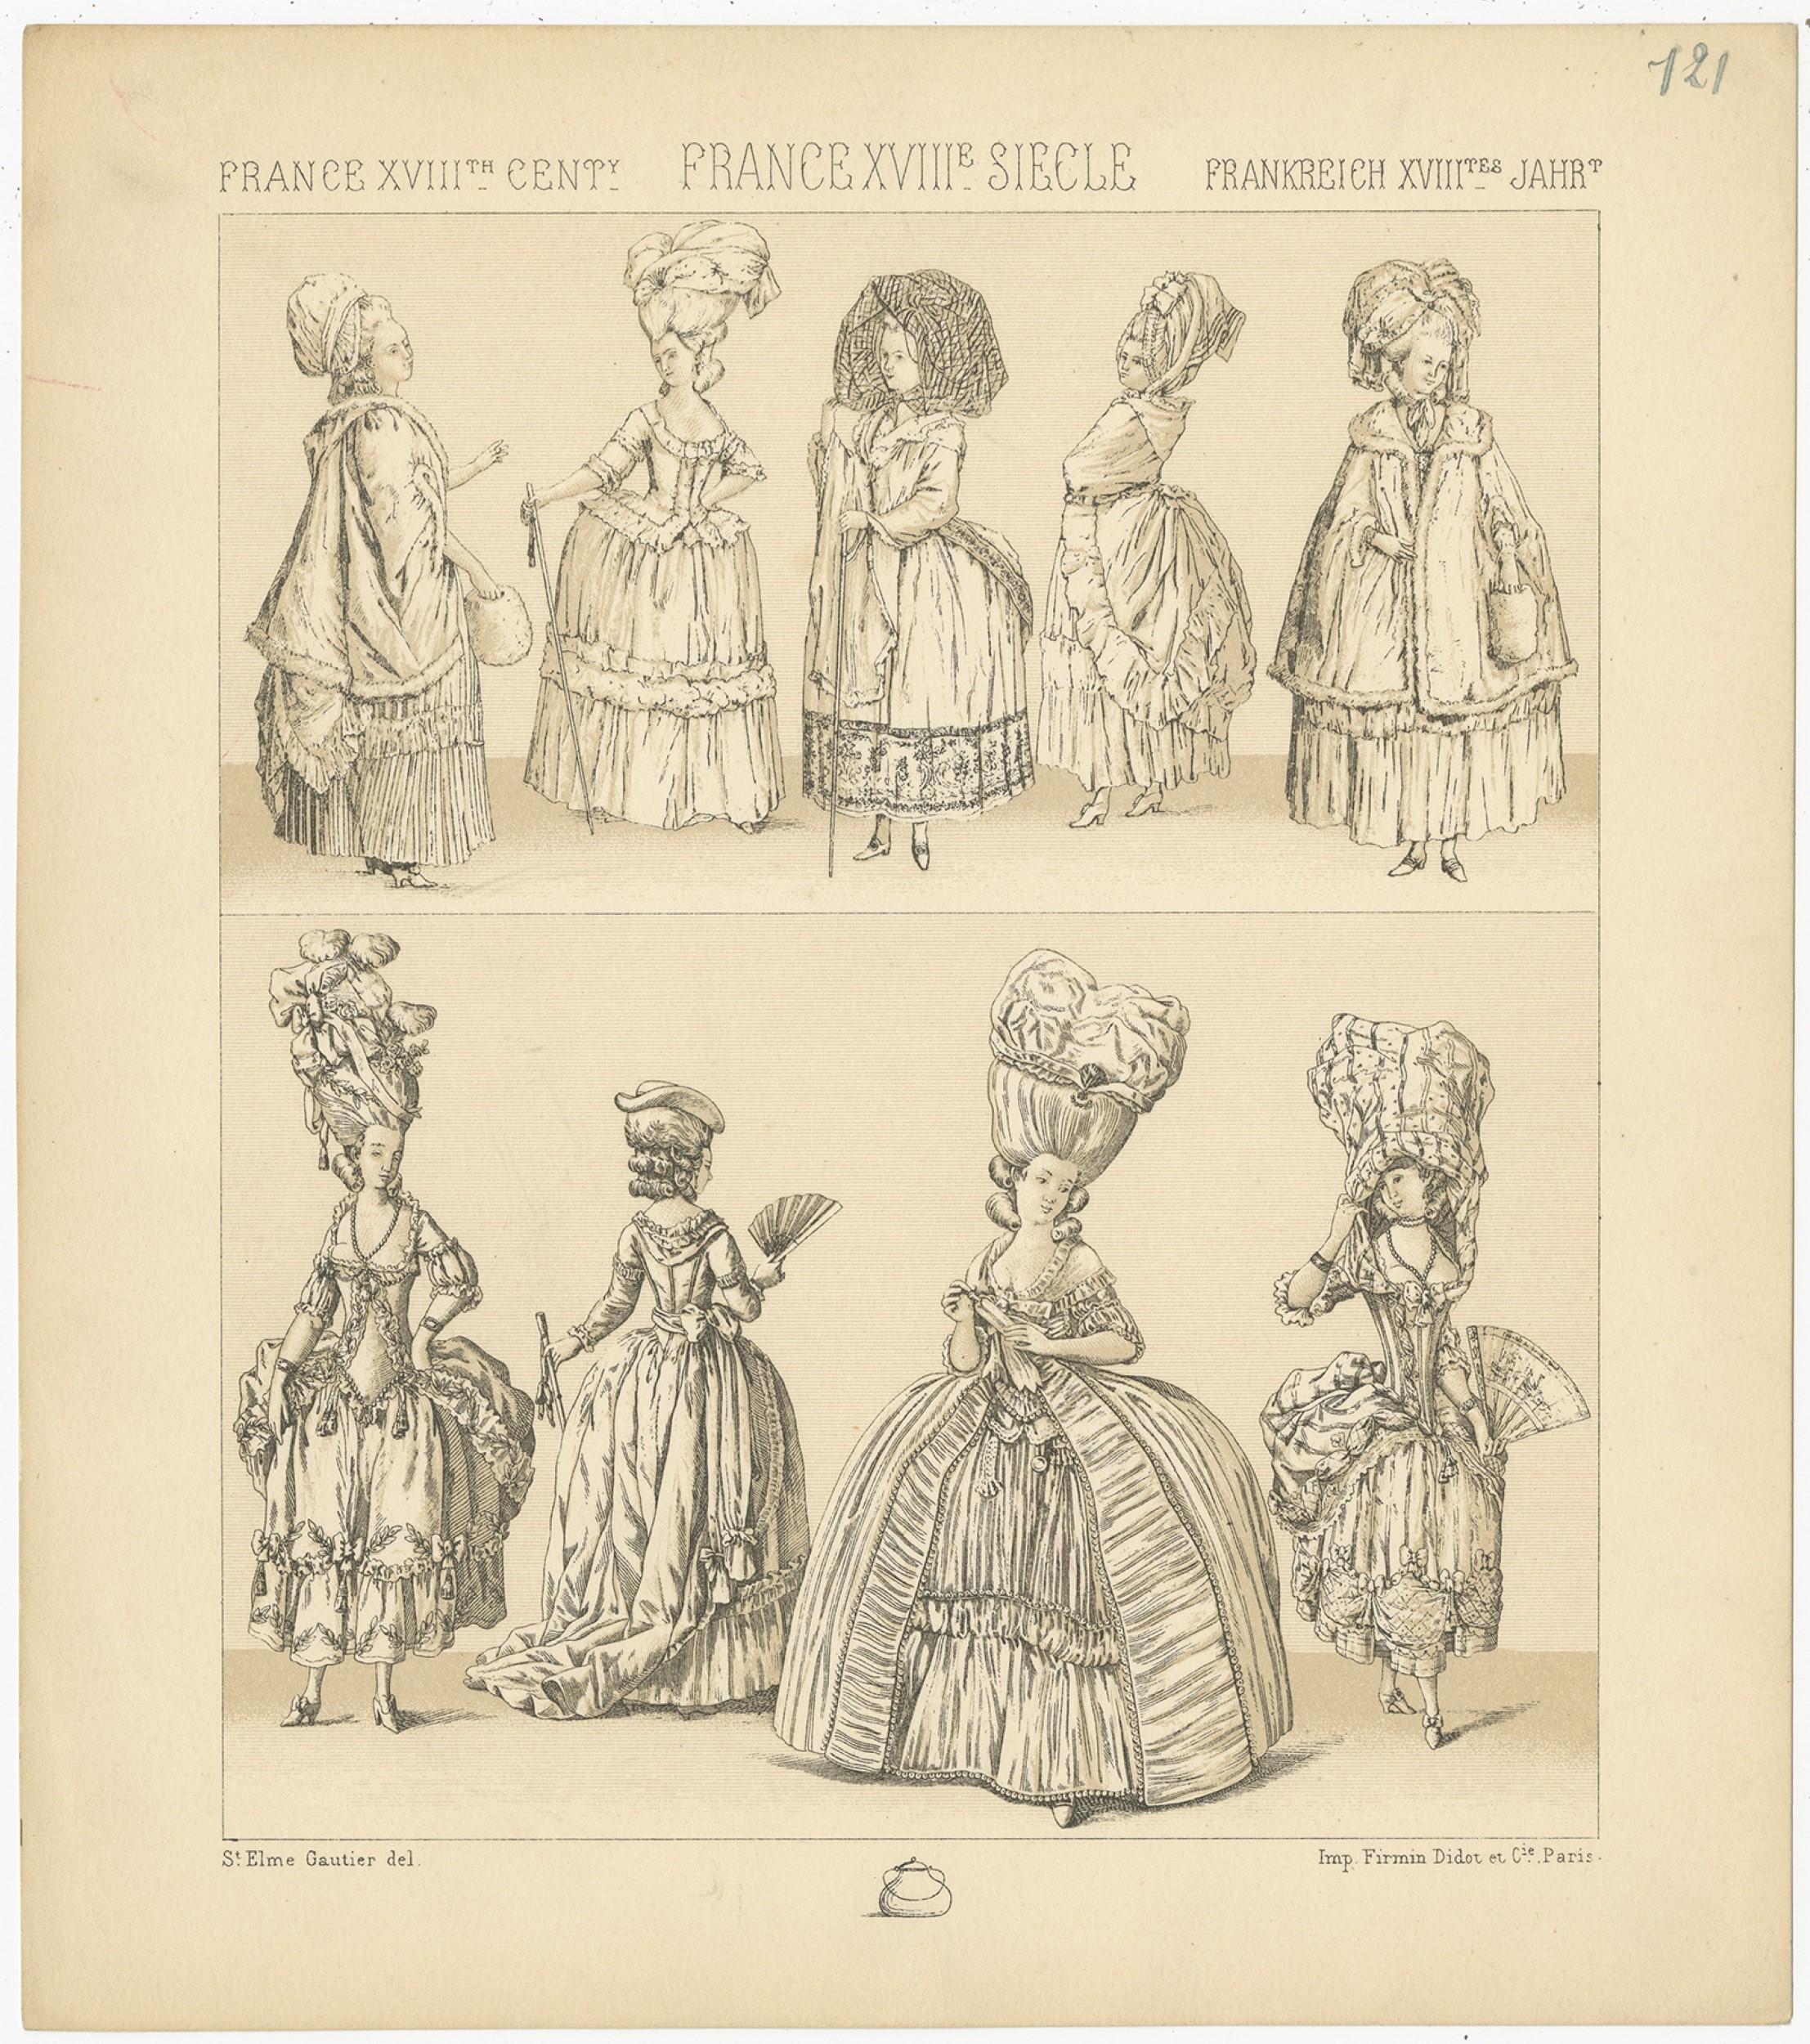 Antique print titled 'France XVIIIth Cent - France XVIIIe, Siecle - Frankreich XVIIItes Jahr'. Chromolithograph of French 18th century dresses. This print originates from 'Le Costume Historique' by M.A. Racinet. Published, circa 1880.

  